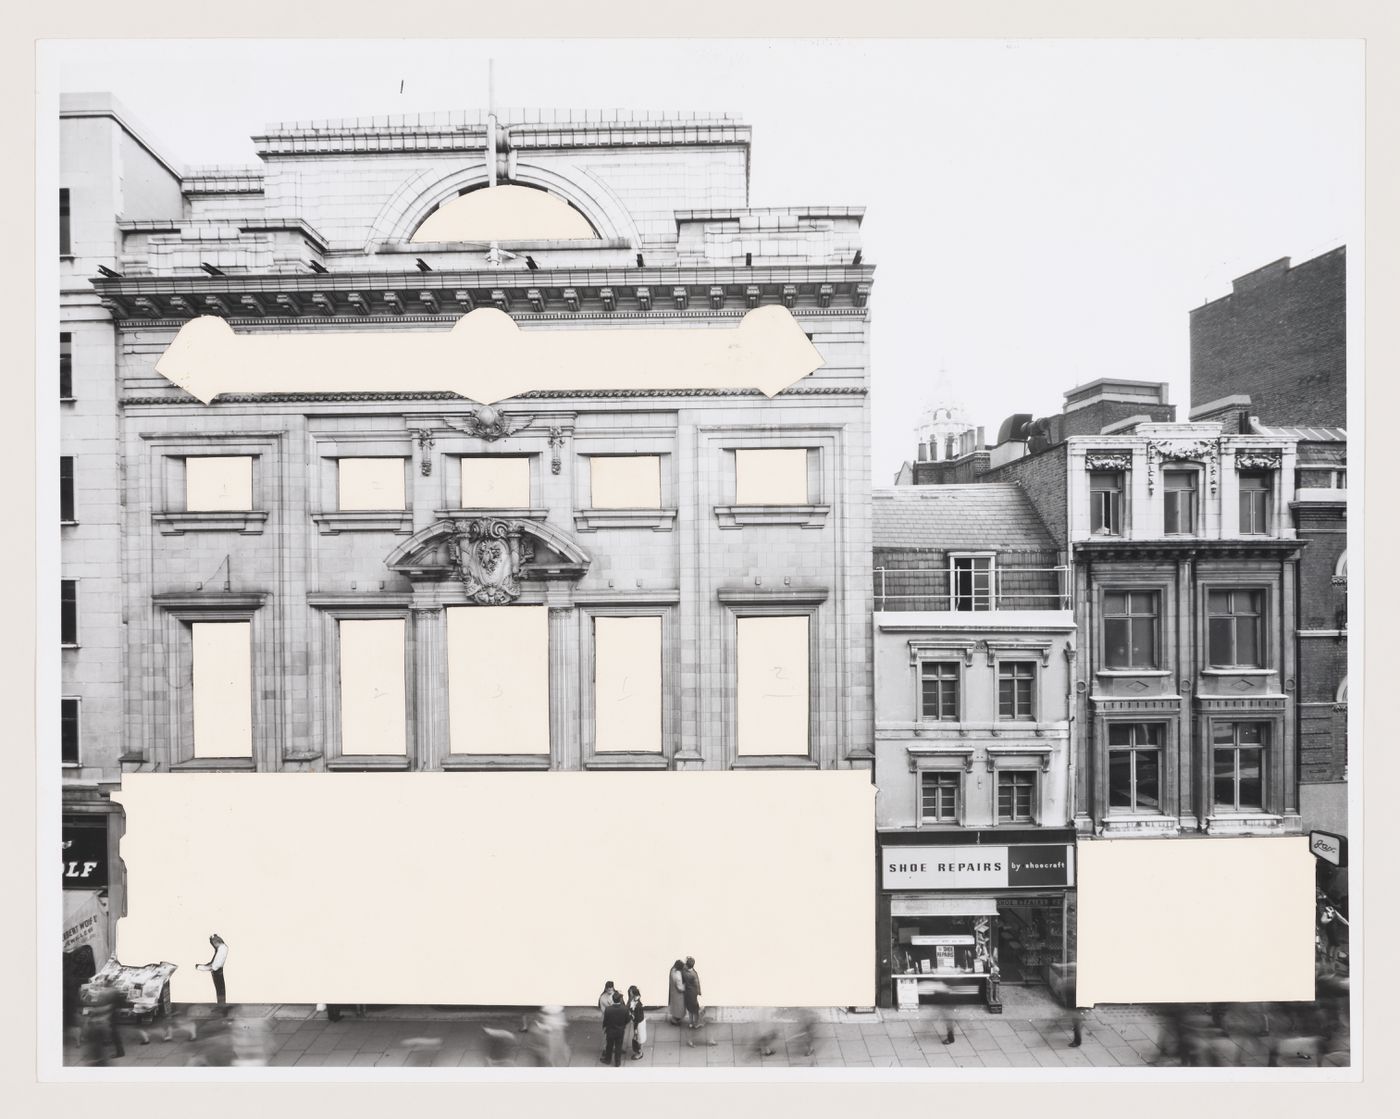 Photomontage of Oxford Corner House, London--from the project file "O.C.H. Feasibility Study"